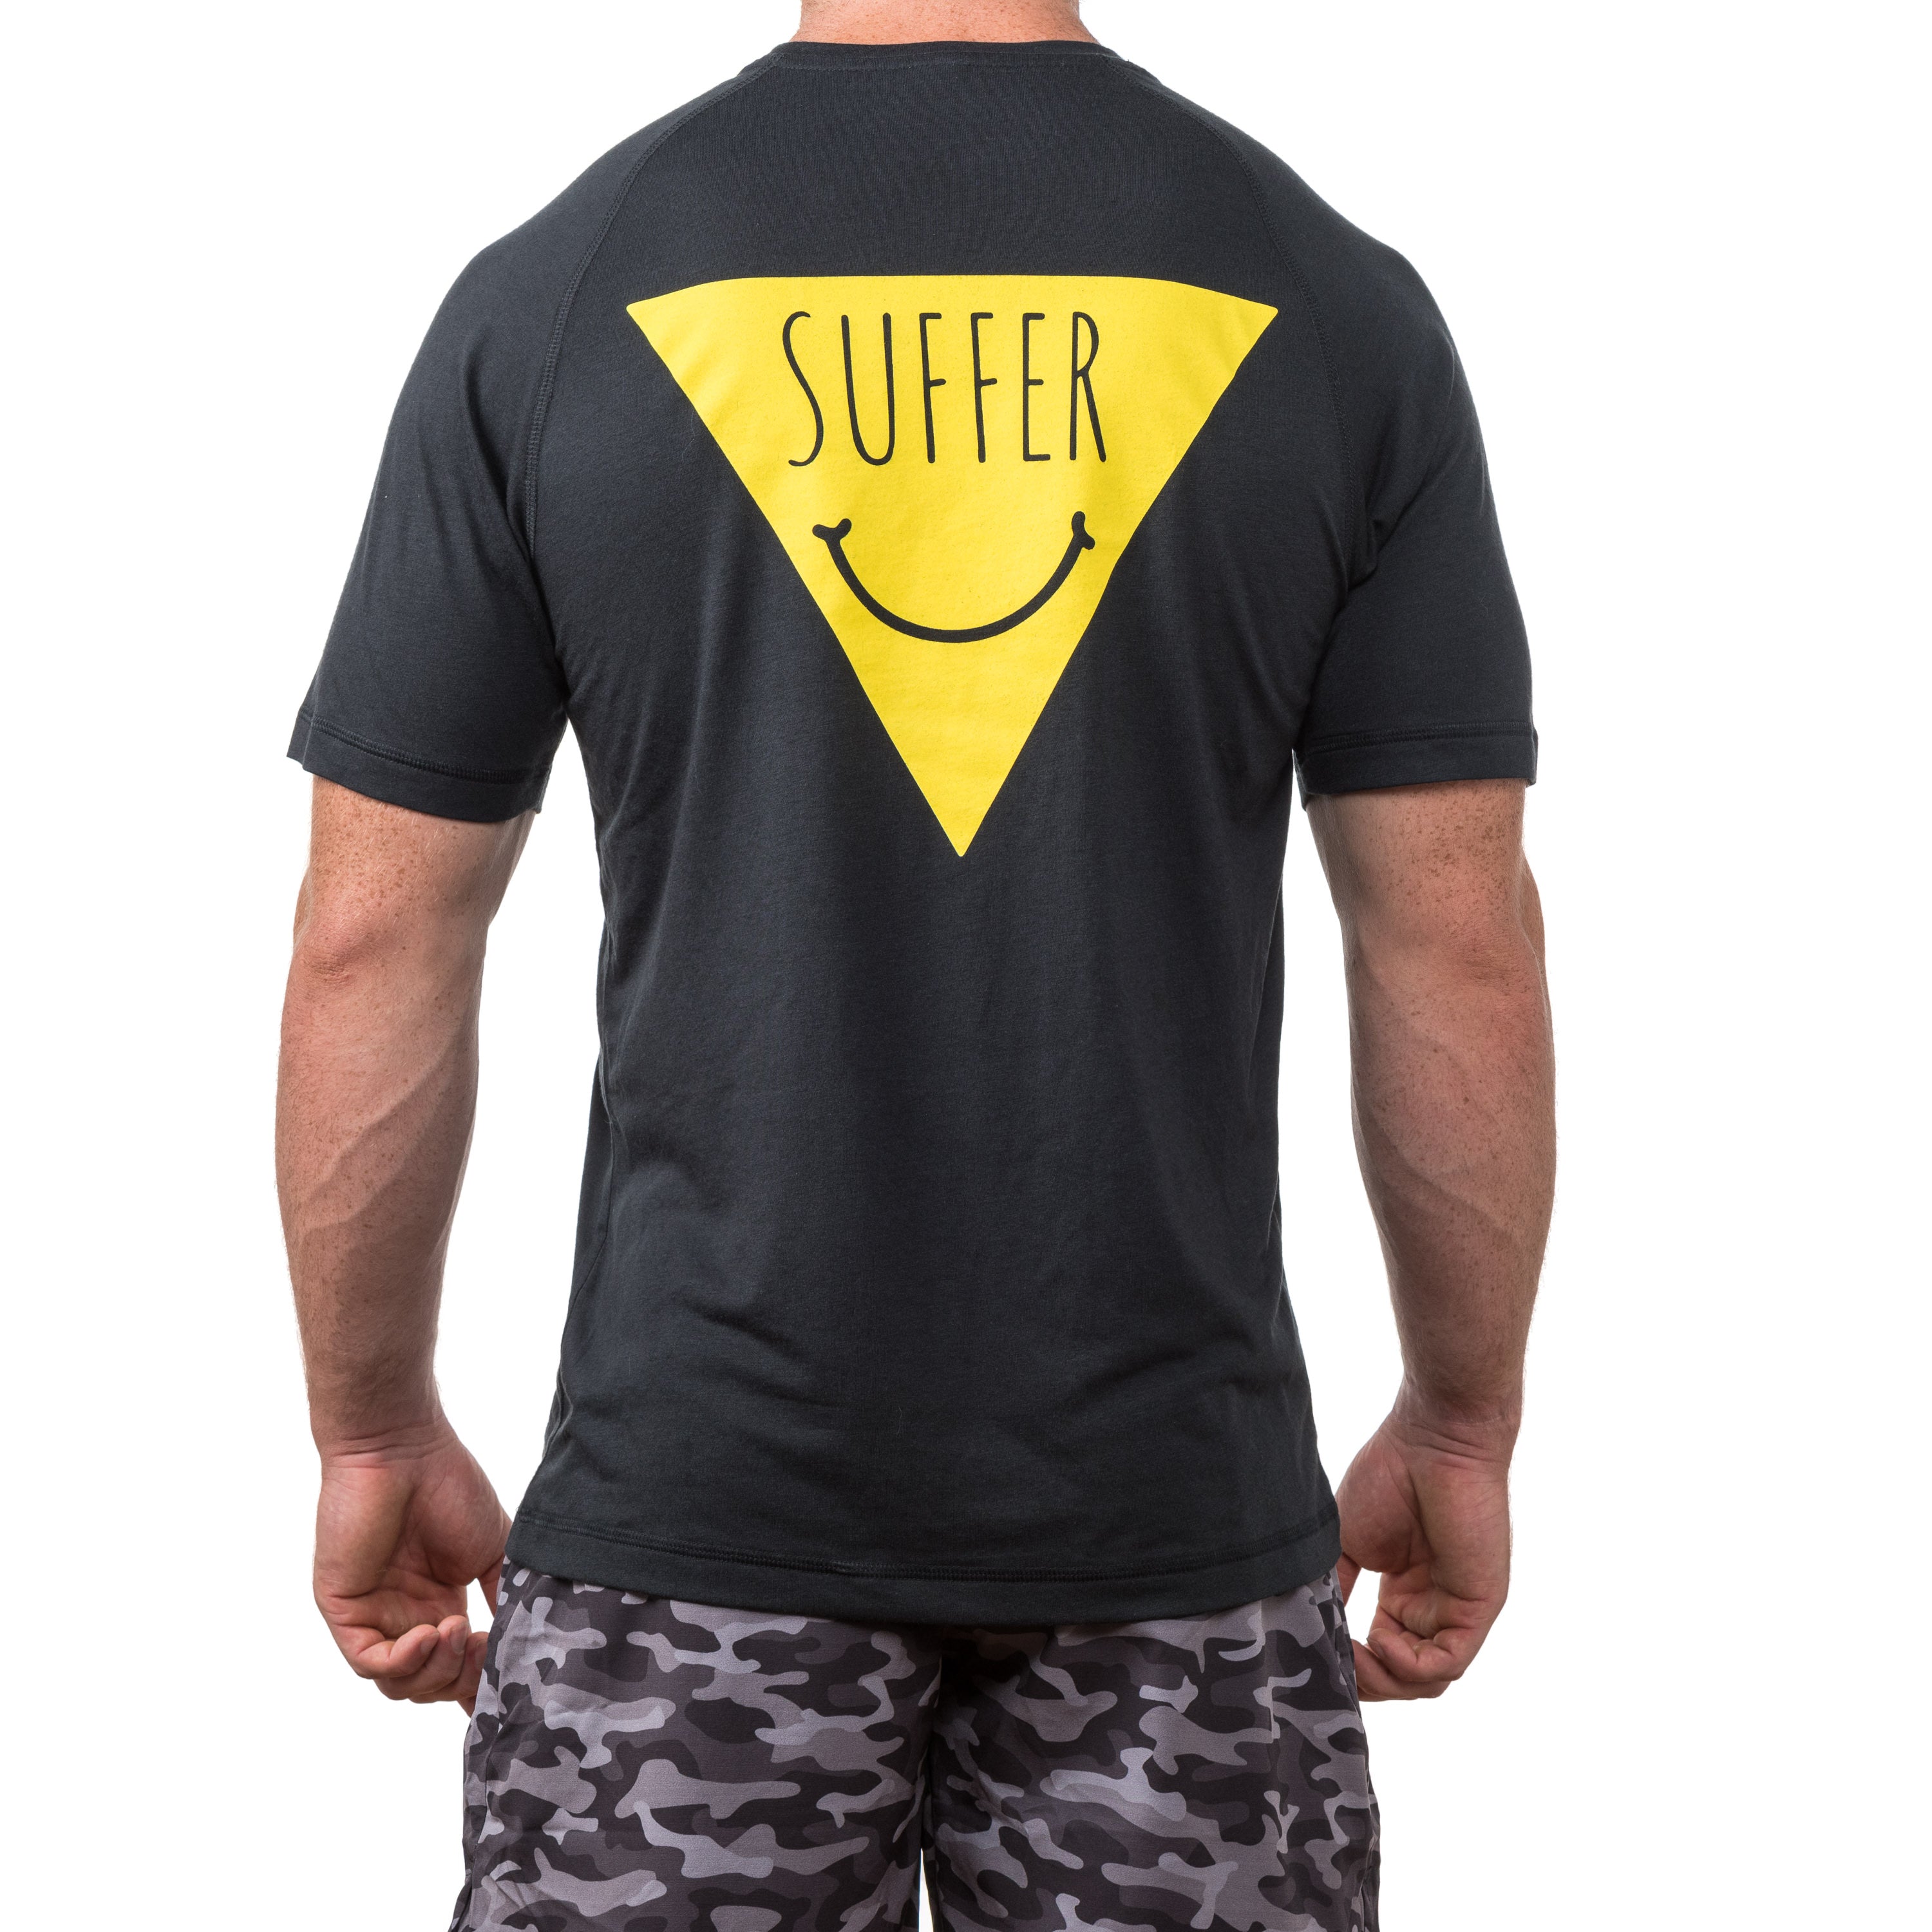 Suffer Hover Tee